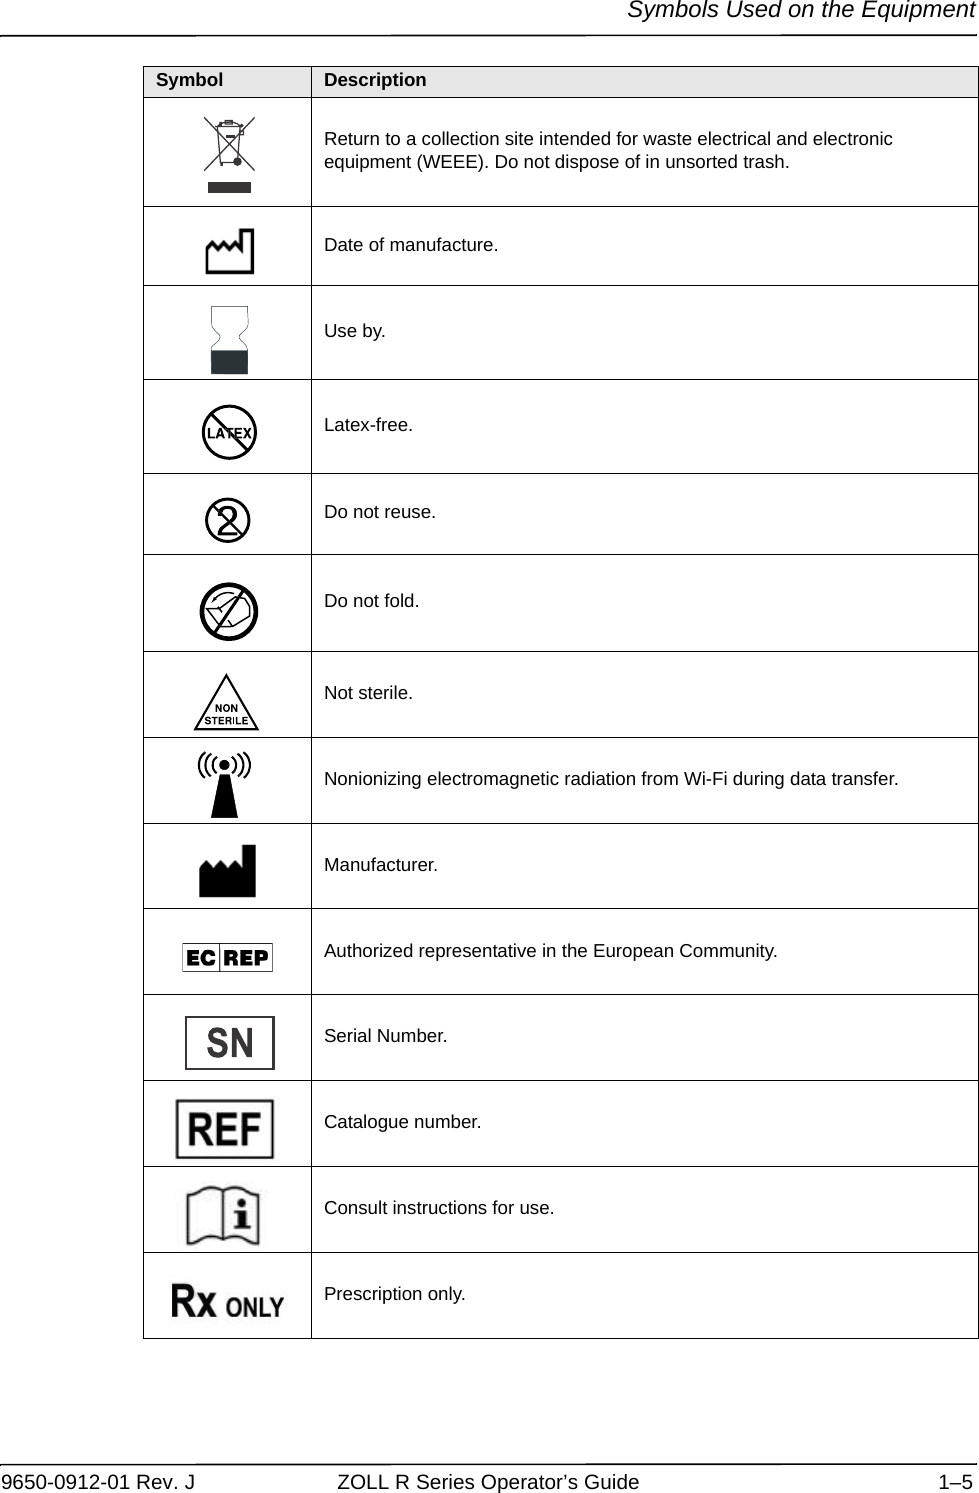 Symbols Used on the Equipment9650-0912-01 Rev. J ZOLL R Series Operator’s Guide 1–5Return to a collection site intended for waste electrical and electronic equipment (WEEE). Do not dispose of in unsorted trash.Date of manufacture.Use by.Latex-free.Do not reuse.Do not fold.Not sterile.Nonionizing electromagnetic radiation from Wi-Fi during data transfer.Manufacturer.Authorized representative in the European Community.Serial Number.Catalogue number.Consult instructions for use.Prescription only.Symbol Description